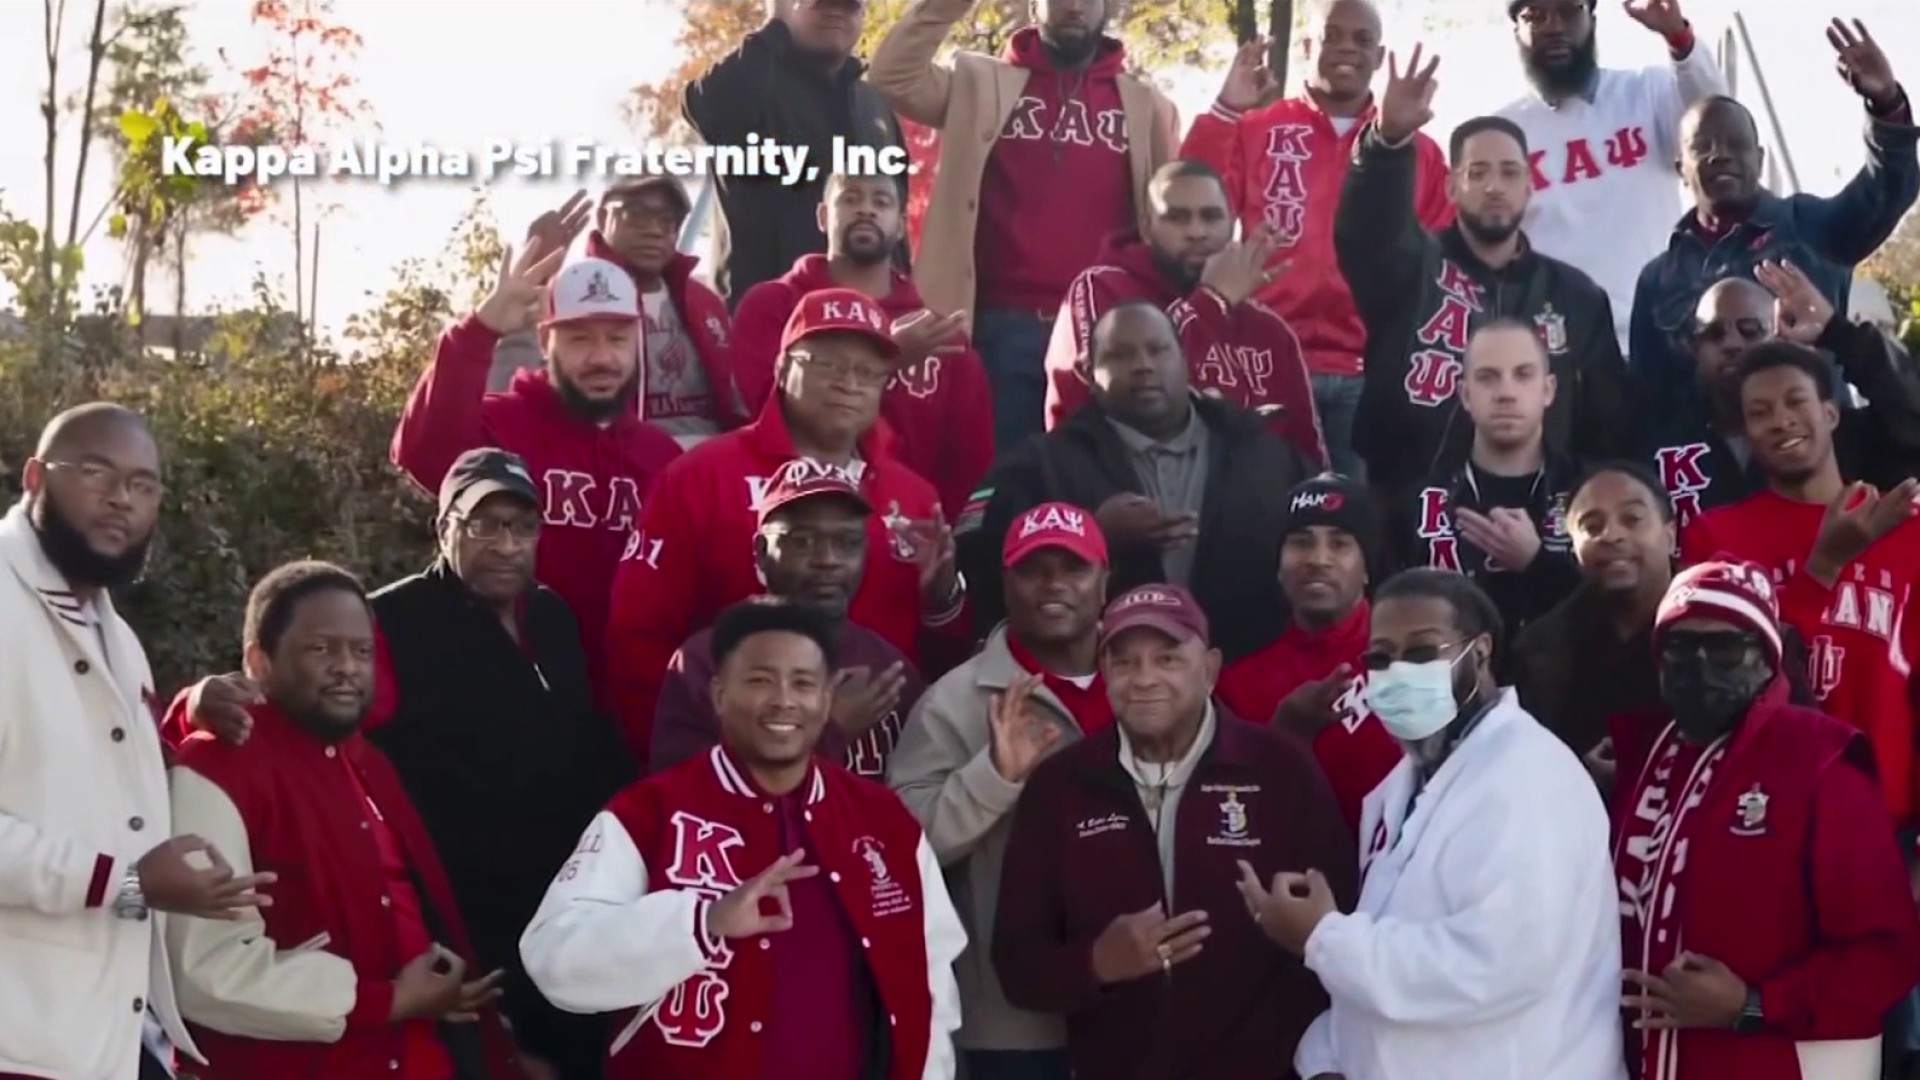 IN COLOR: Leader Kappa Alpha Psi Fraternity Shares Story of Success – NBC